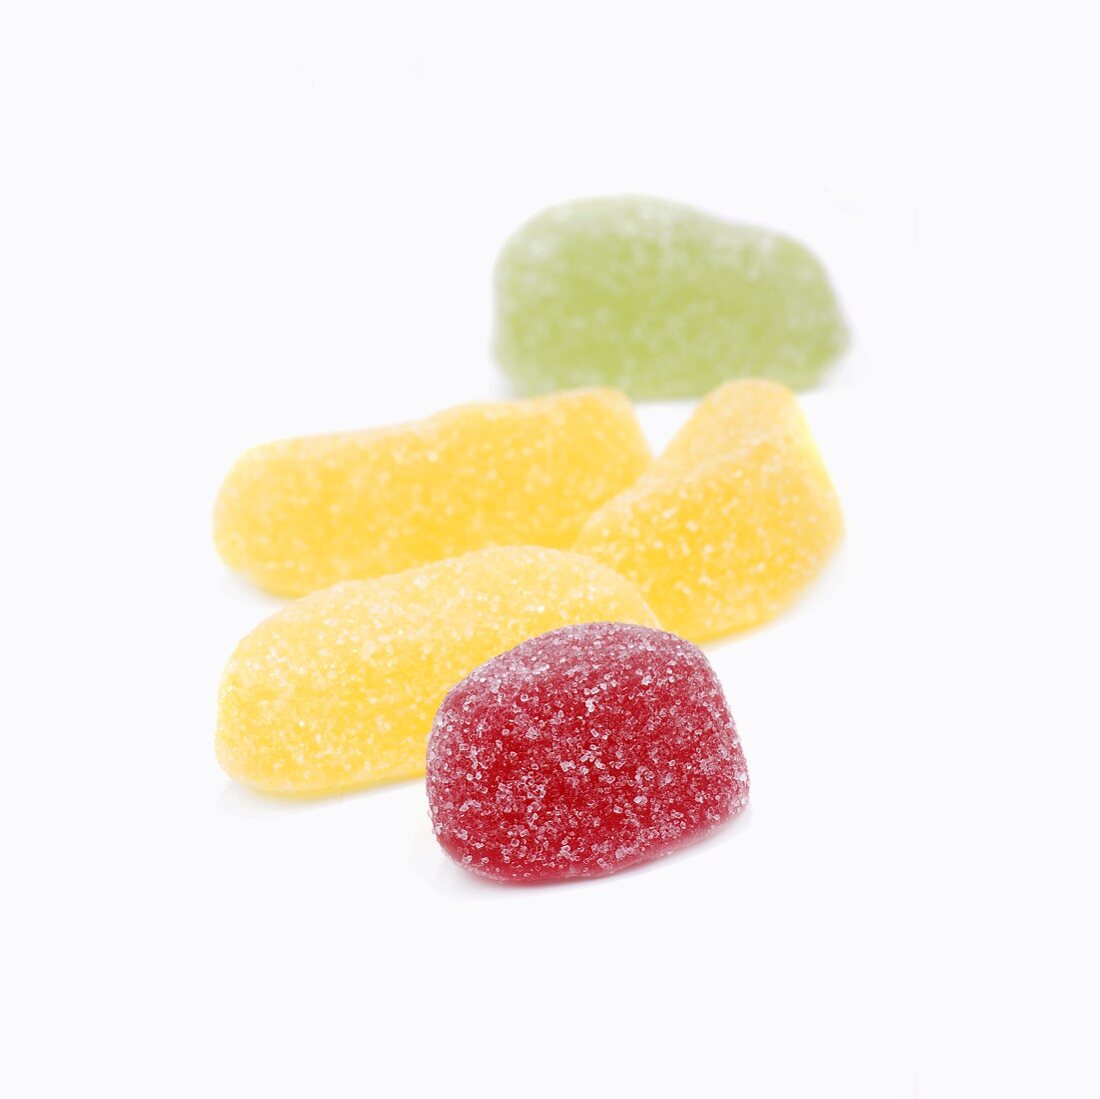 Sugar-coated jelly sweets